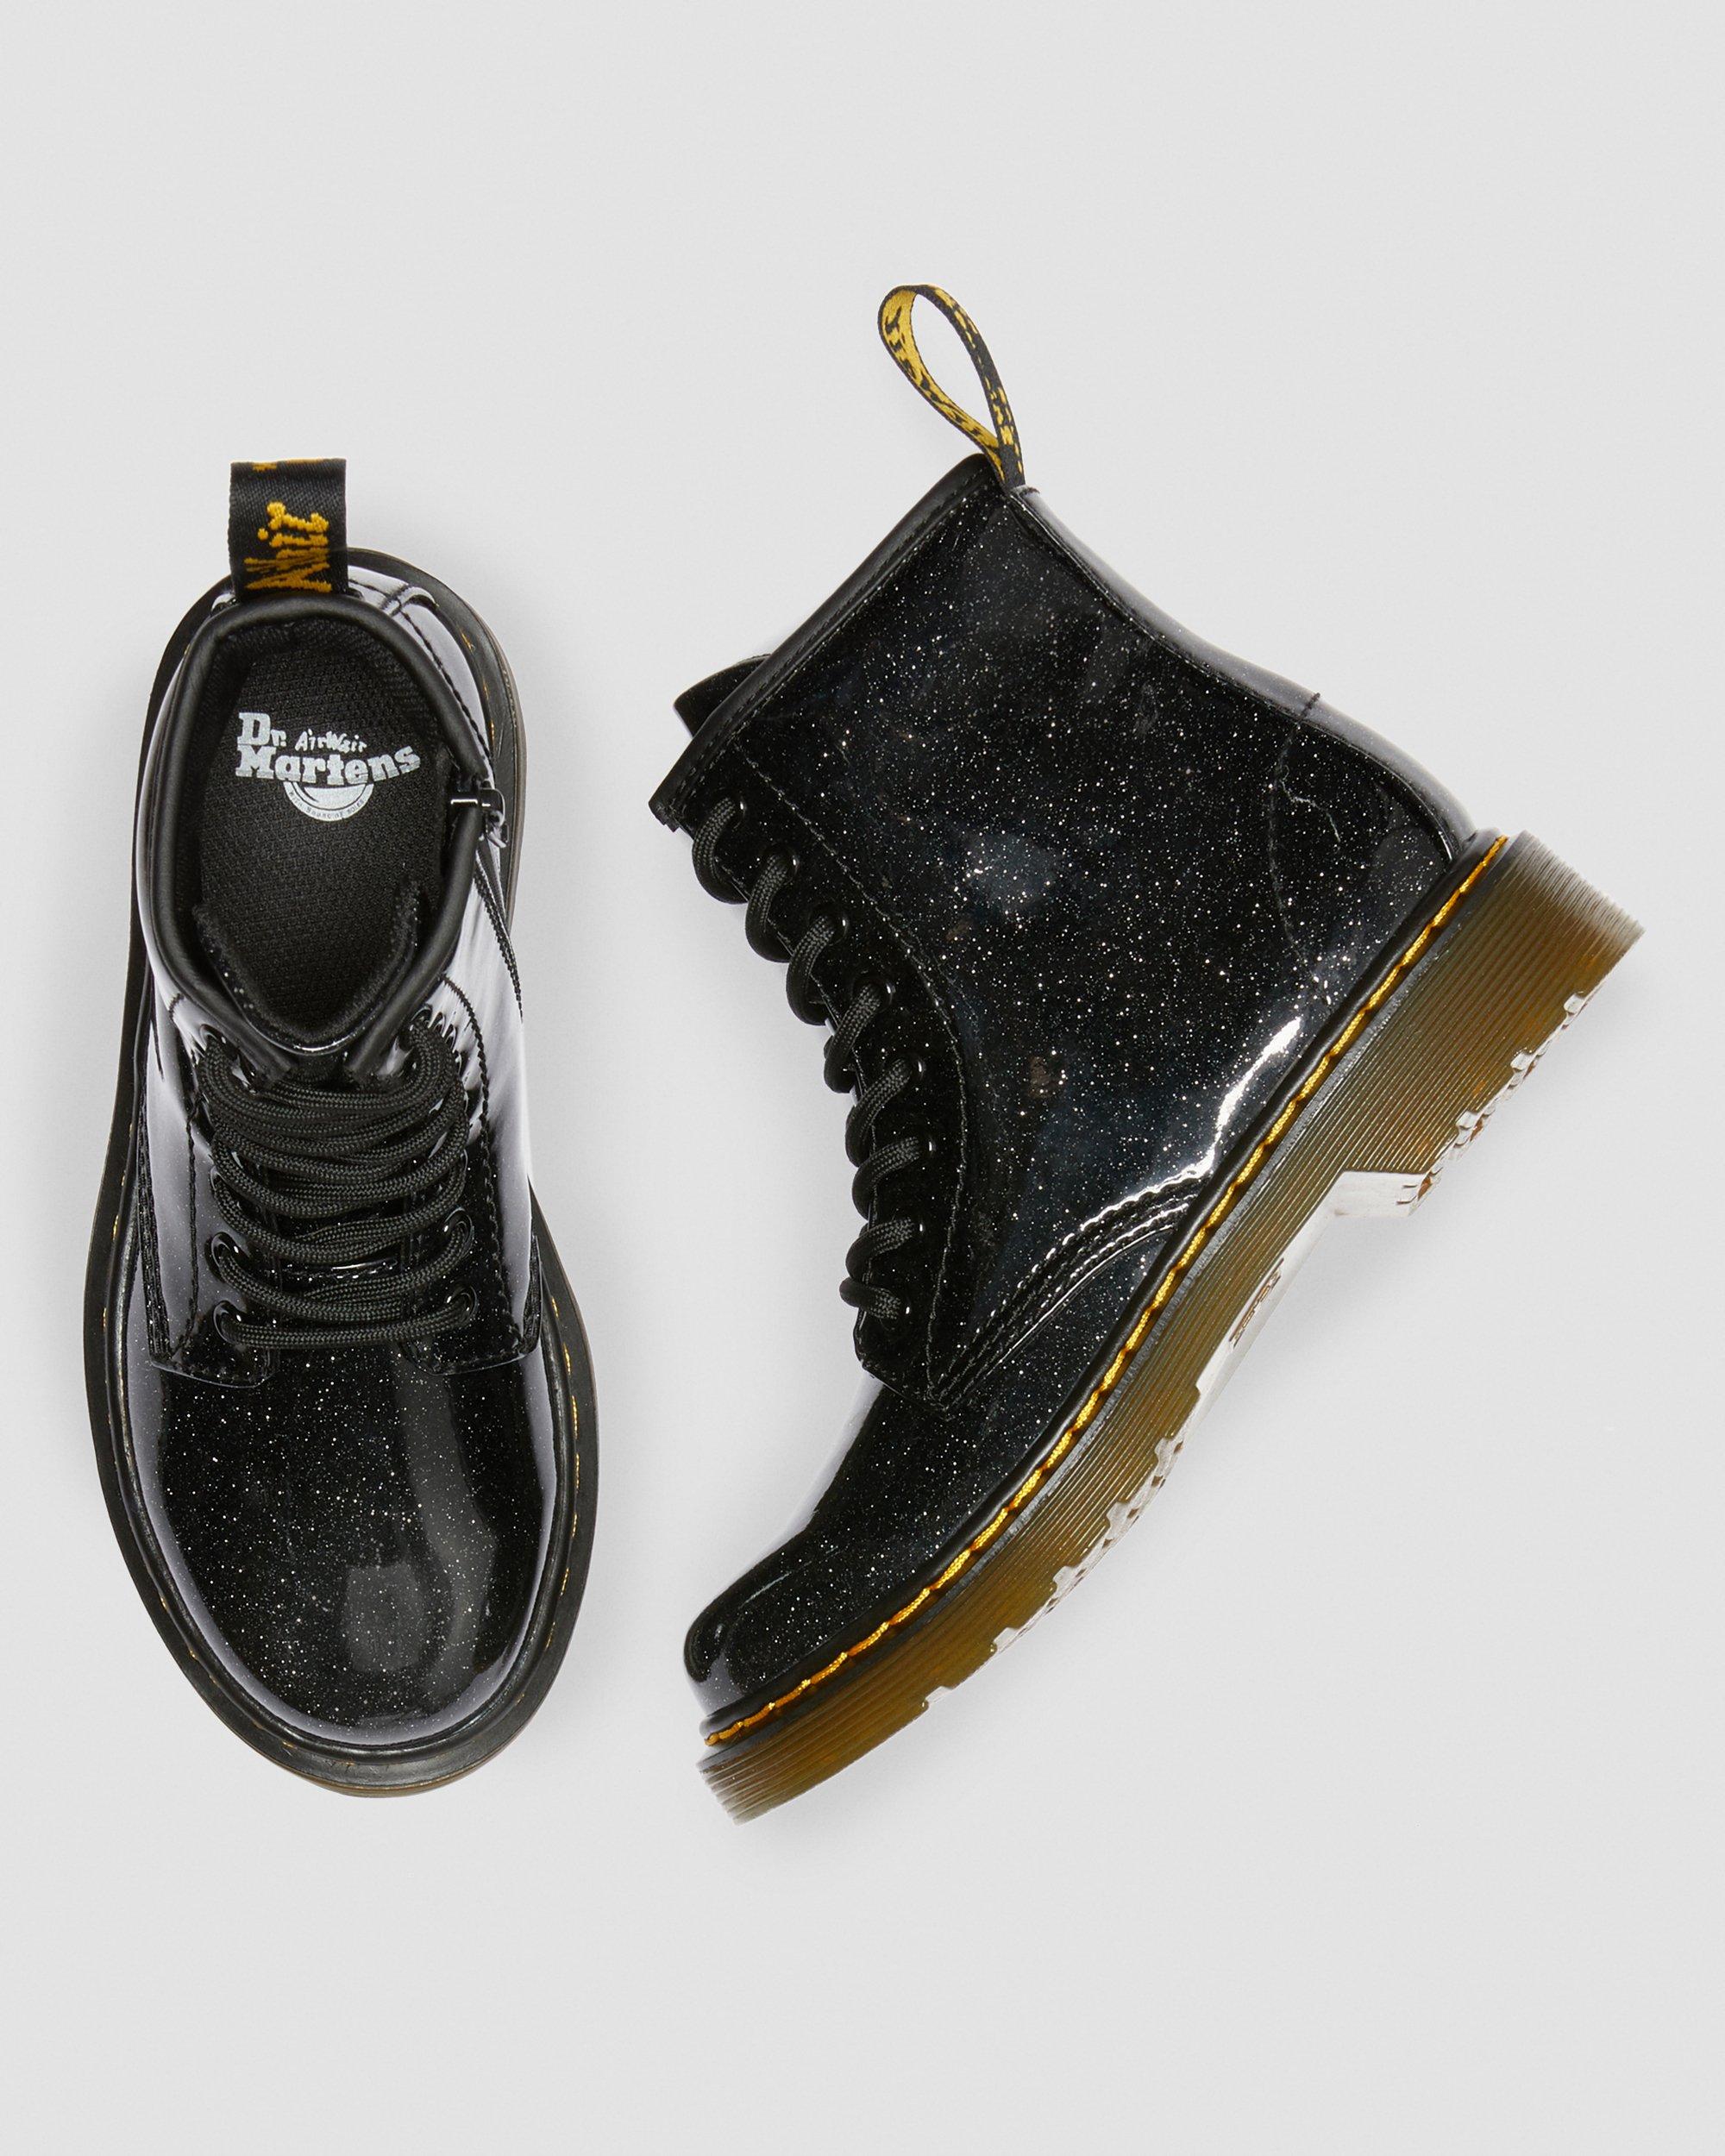 Black Junior | Glitter Martens Dr. Boots Up 1460 Lace in